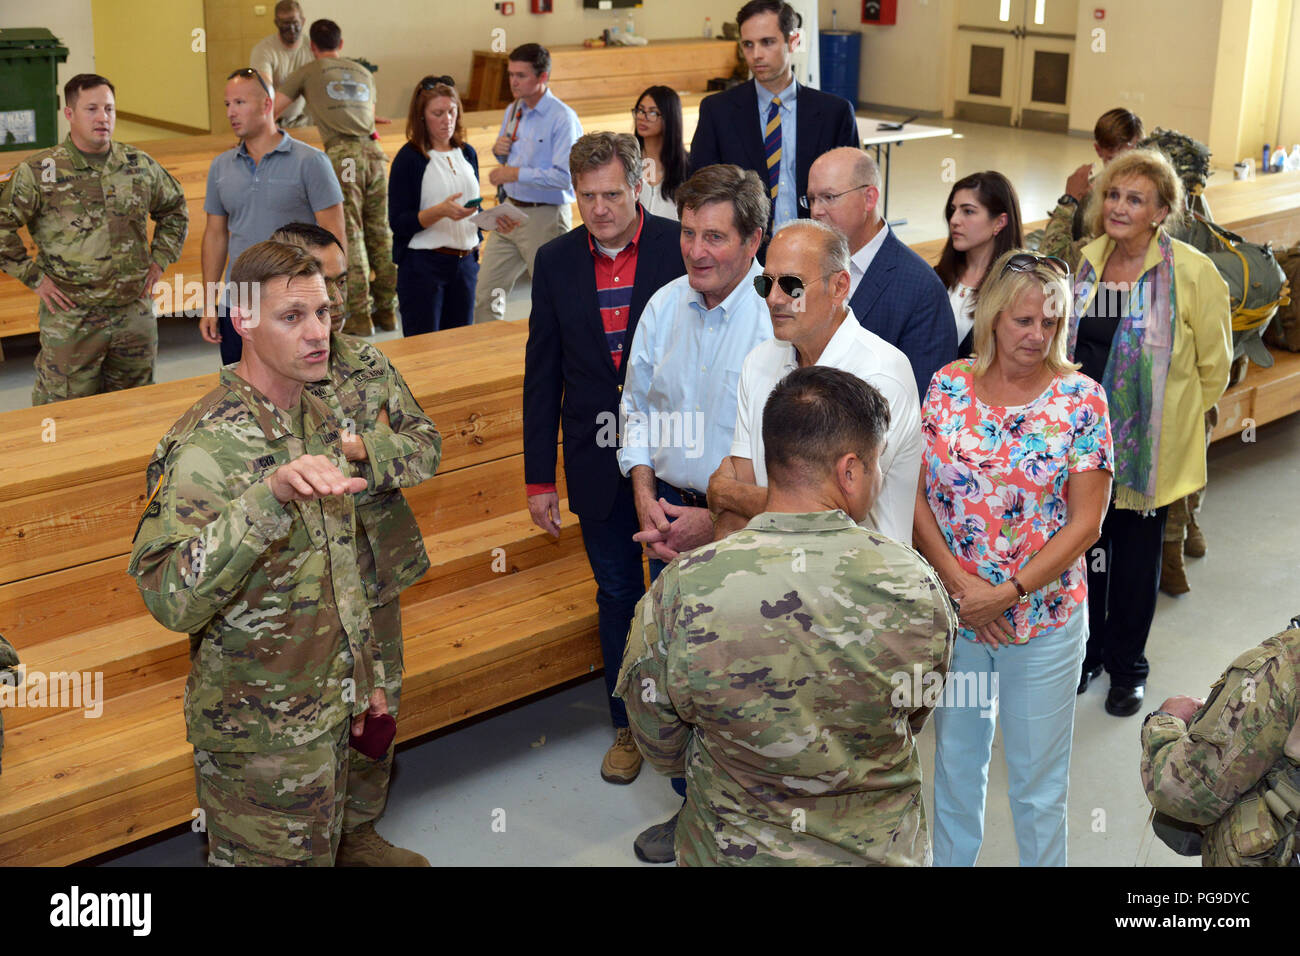 From left, U. S. Army Lt. Col. Kurt J. Cyr, deputy commander of 173rd Airborne Brigade, brief members of the House Armed Services Committee about airborne operations during a U.S. congressional staff delegation visit to the Personnel Alert Holding Area (PAHA) at Aviano Air Base, Italy, Aug. 23, 2018. The 173rd Airborne Brigade is the U.S. Army Contingency Response Force in Europe, capable of projecting ready forces anywhere in the U.S. European, Africa or Central Commands' areas of responsibility. (U.S. Army photo by Paolo Bovo) Stock Photo